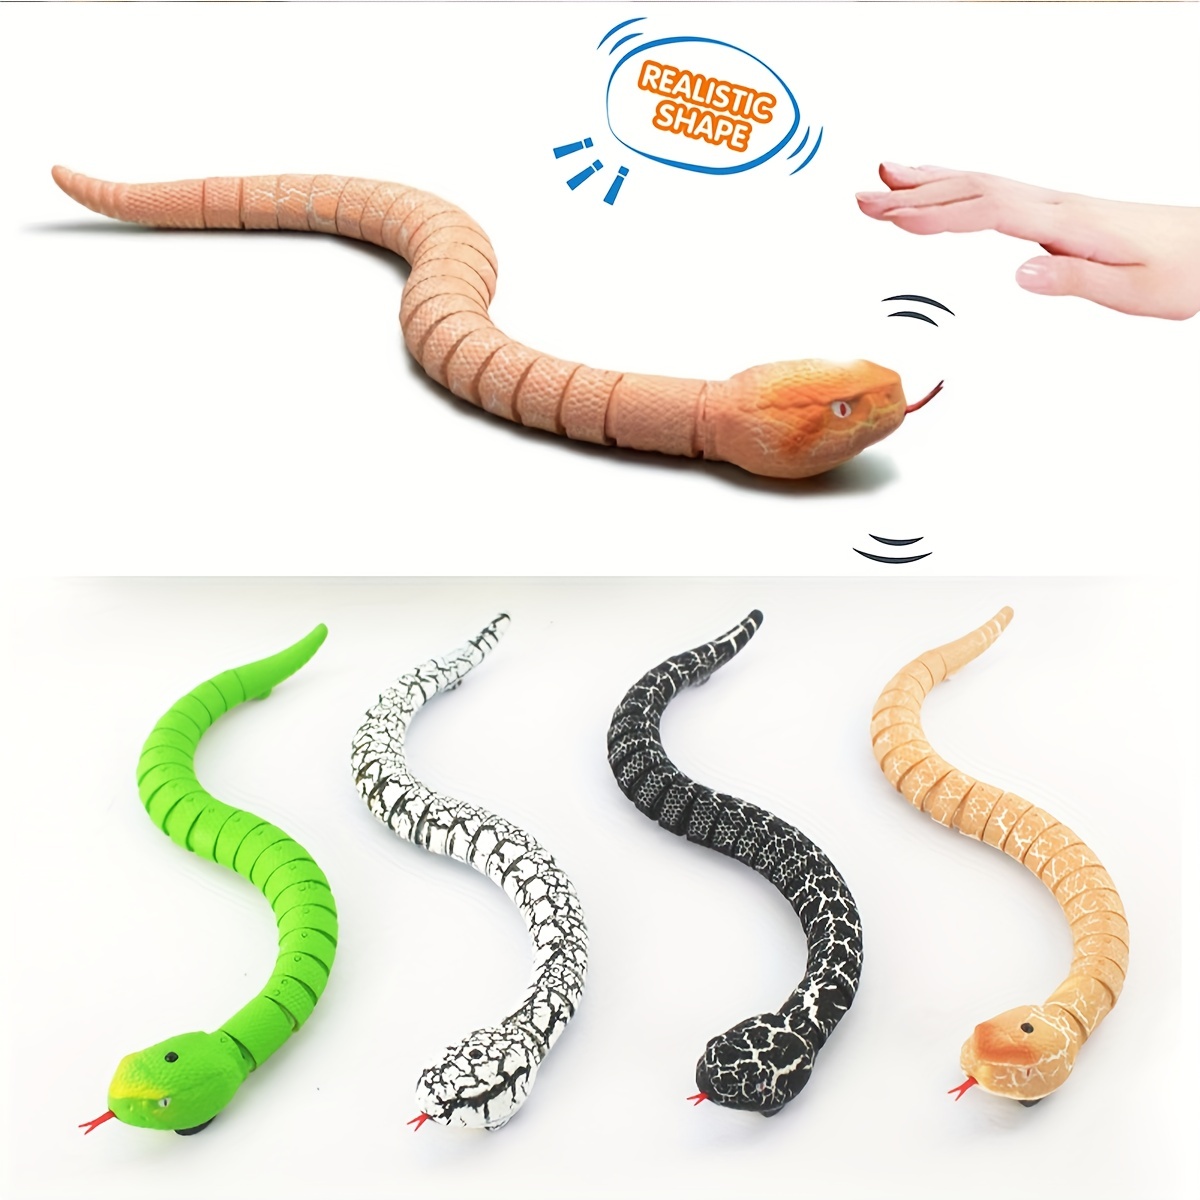 Smart Sensing Interactive Snake Toy for Cats, Automático